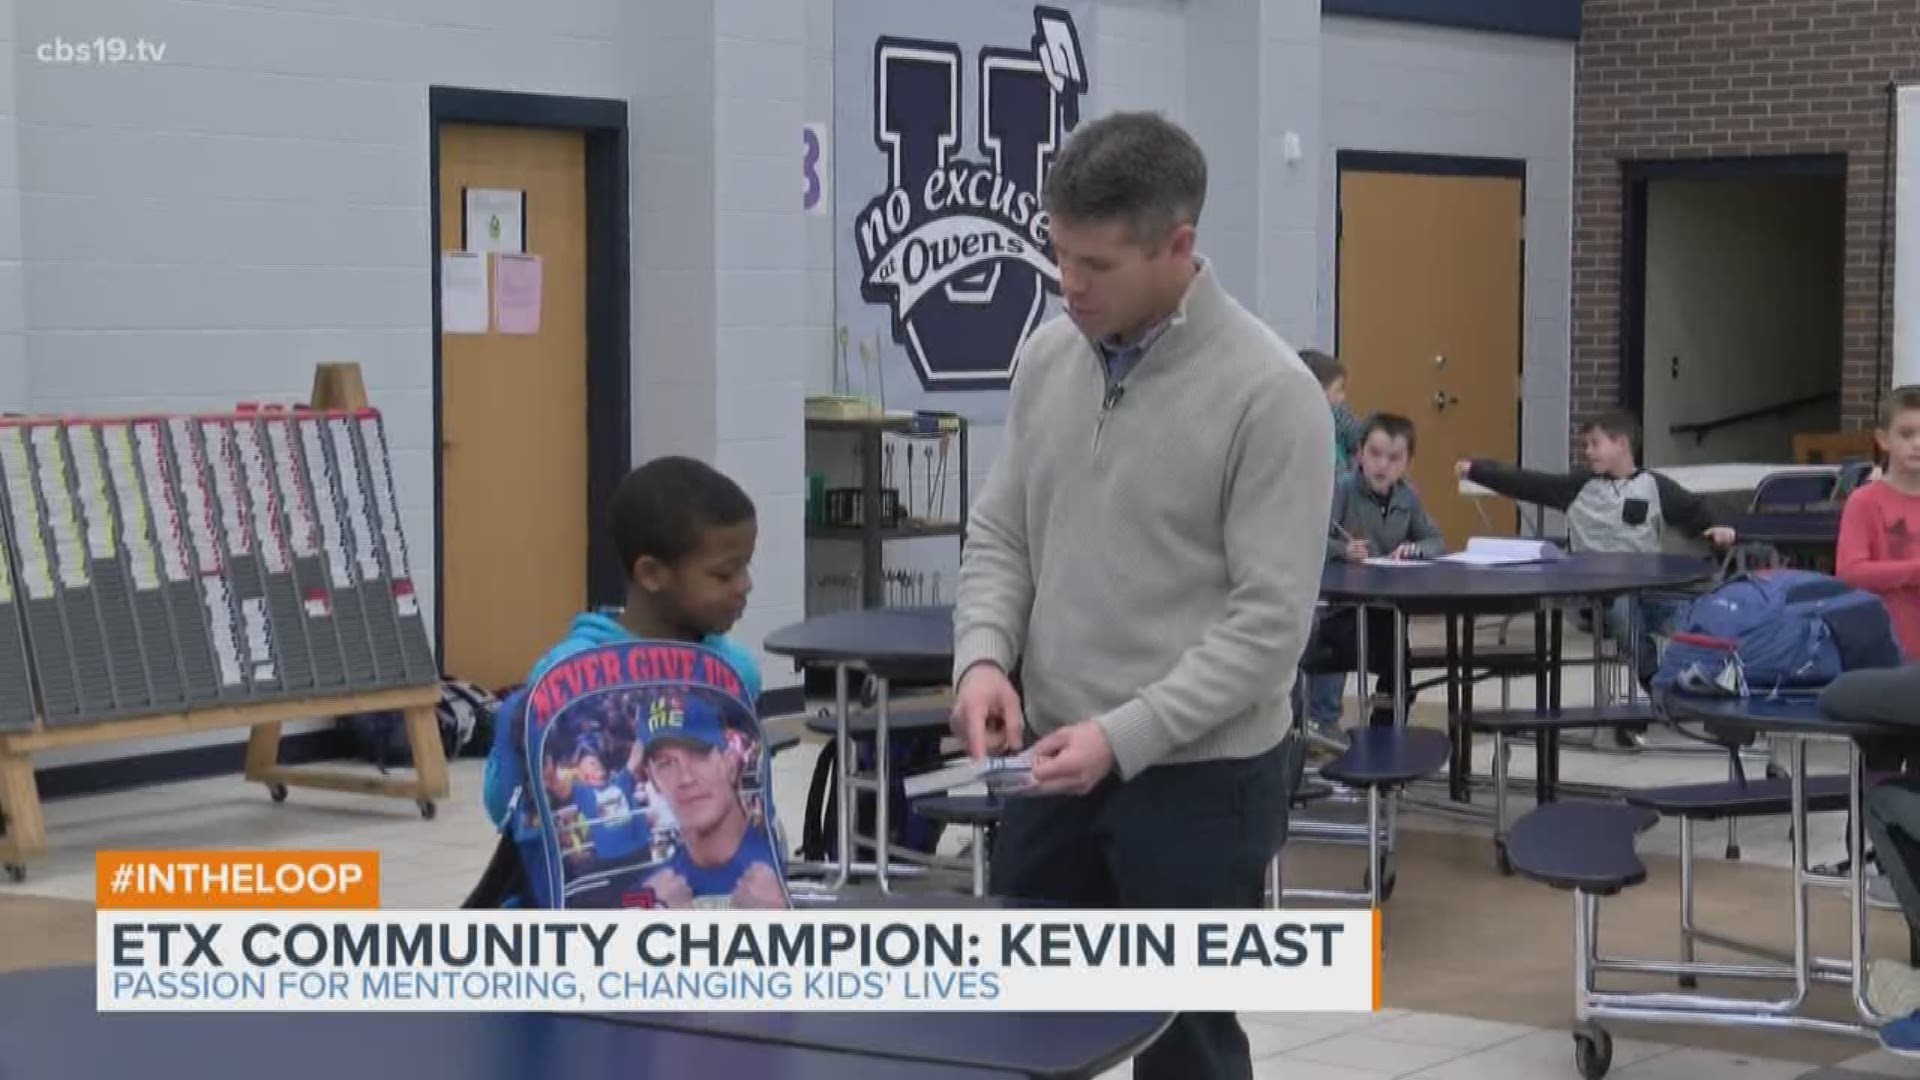 East Texas is filled with people who work tirelessly to make a difference in the community. CBS 19 is honoring those Community Champions, beginning with Kevin East, President of the Mentoring Alliance.